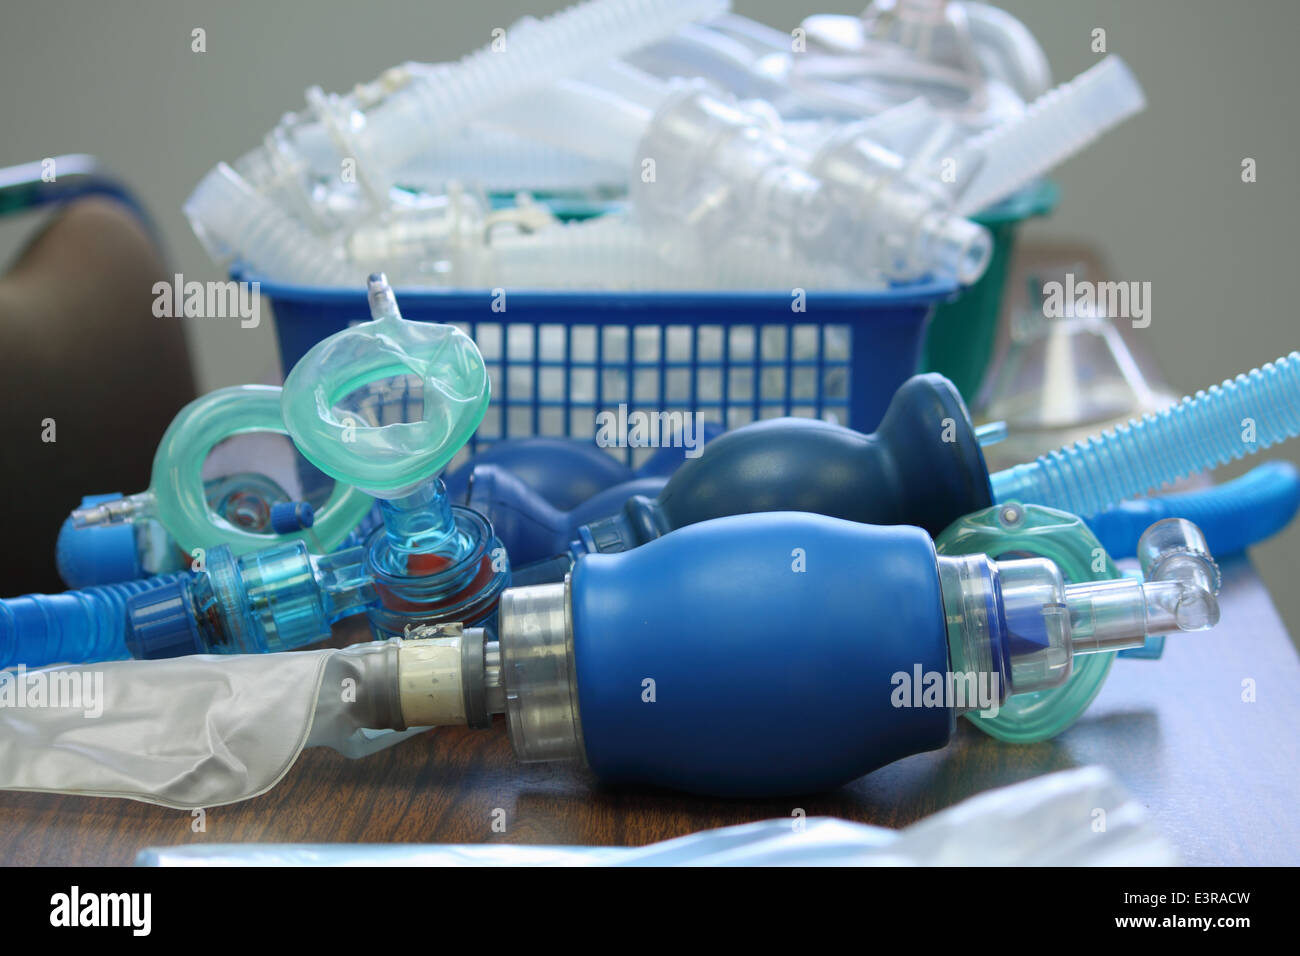 Respirator and supplies on a table for cpr training class. Stock Photo